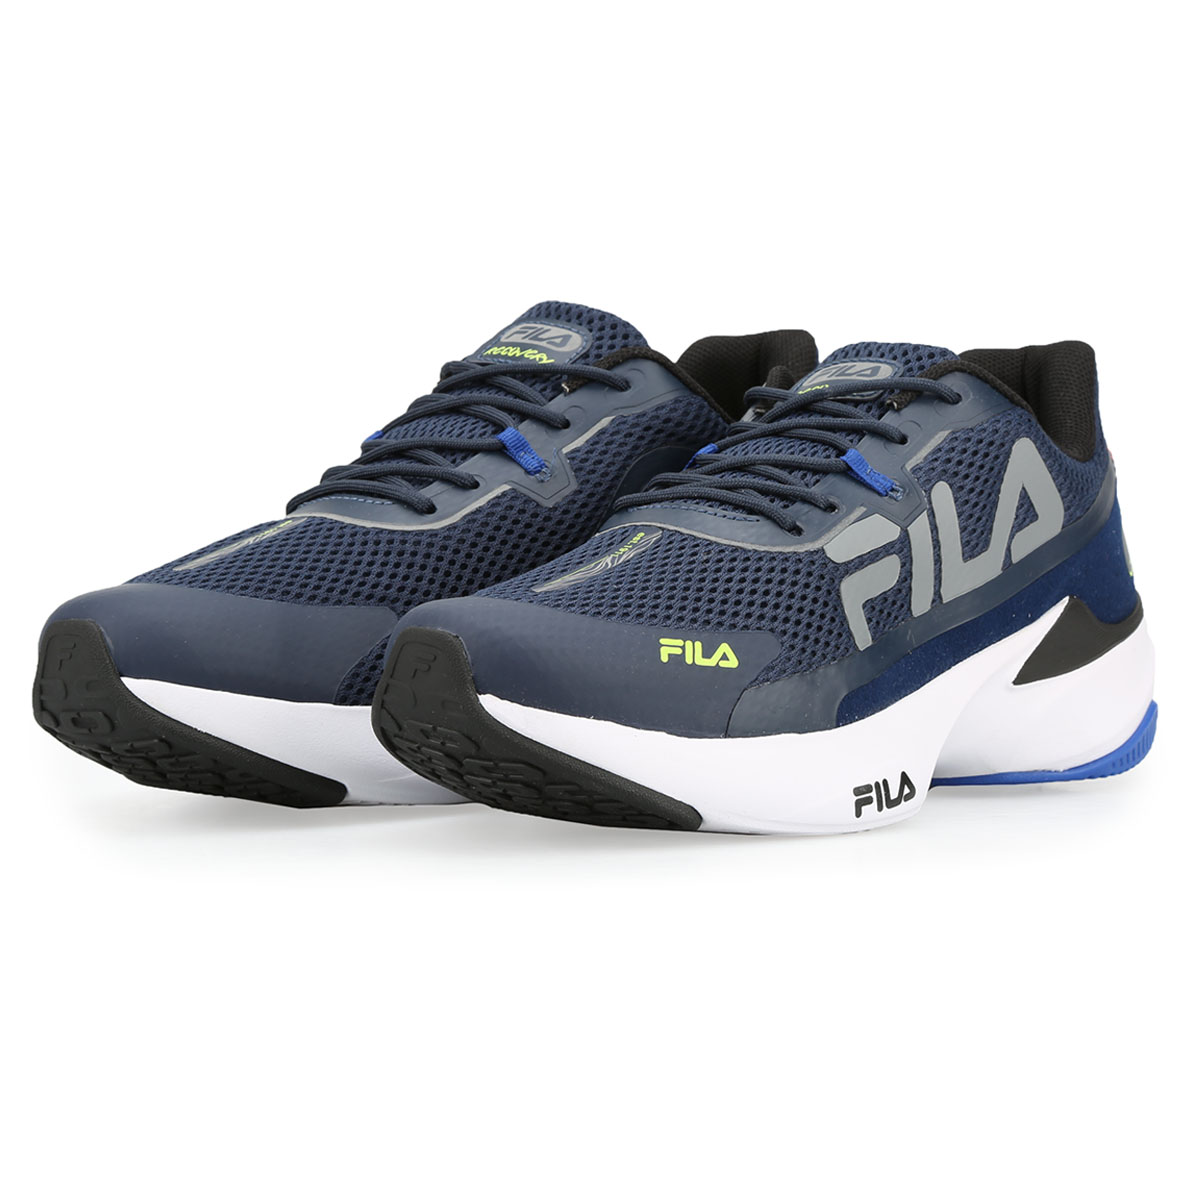 Zapatillas Fila Recovery,  image number null